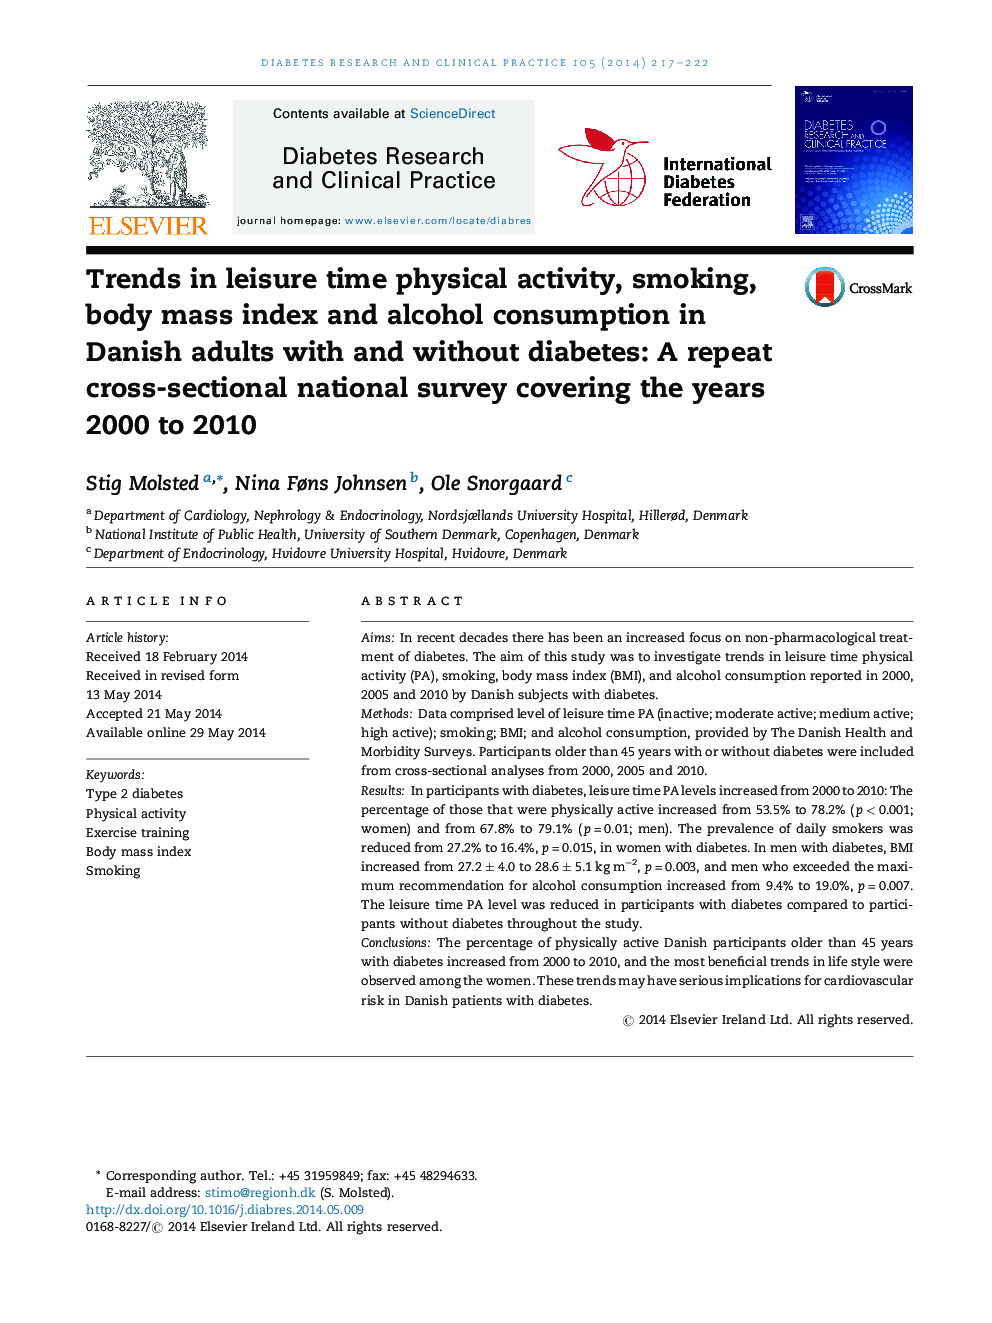 Trends in leisure time physical activity, smoking, body mass index and alcohol consumption in Danish adults with and without diabetes: A repeat cross-sectional national survey covering the years 2000 to 2010